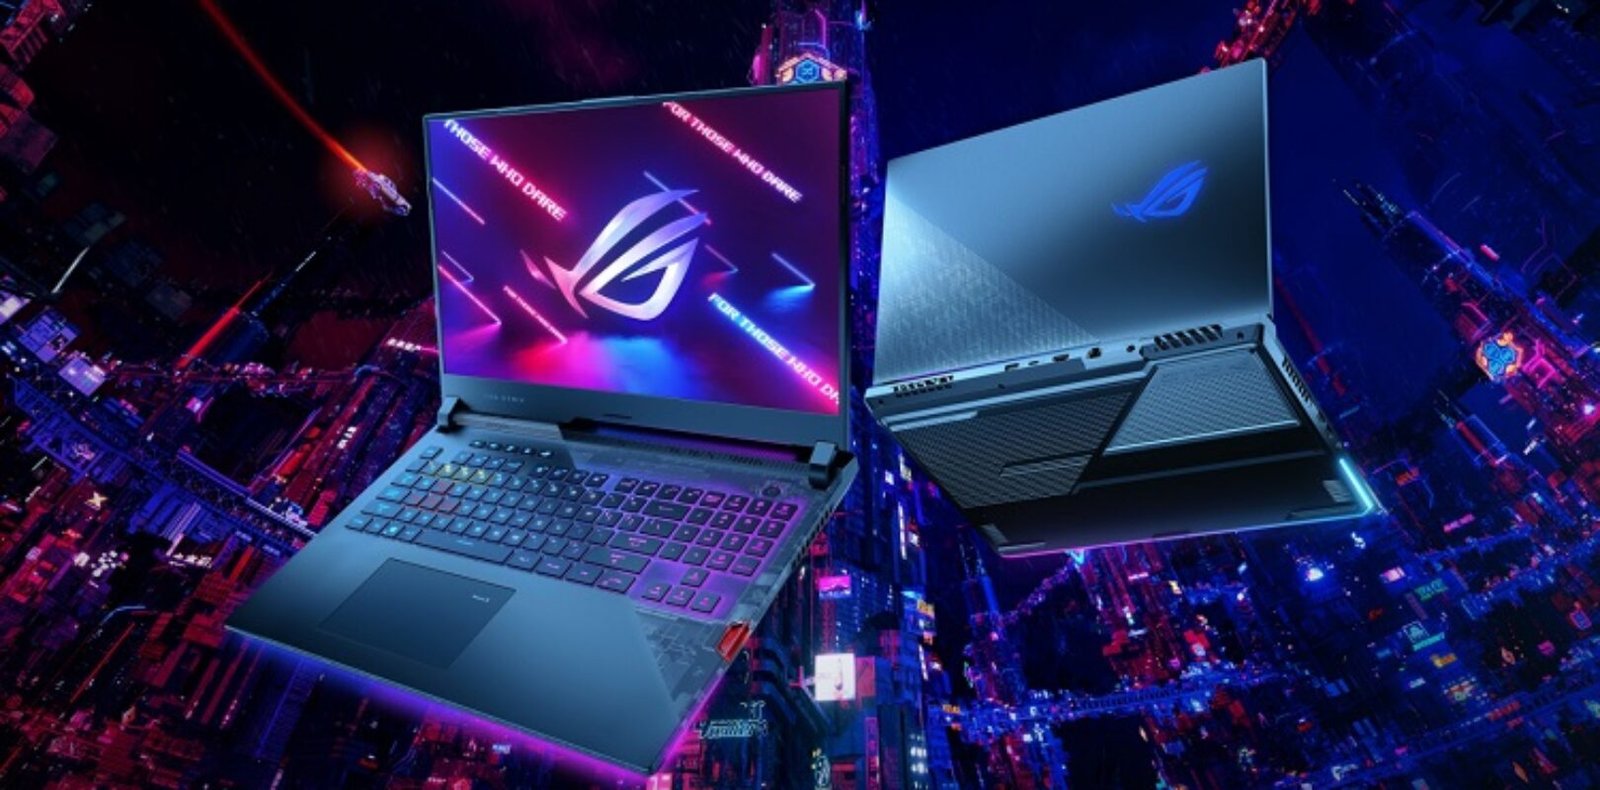 ASUS launches new ROG Strix SCAR series gaming laptops with 300Hz